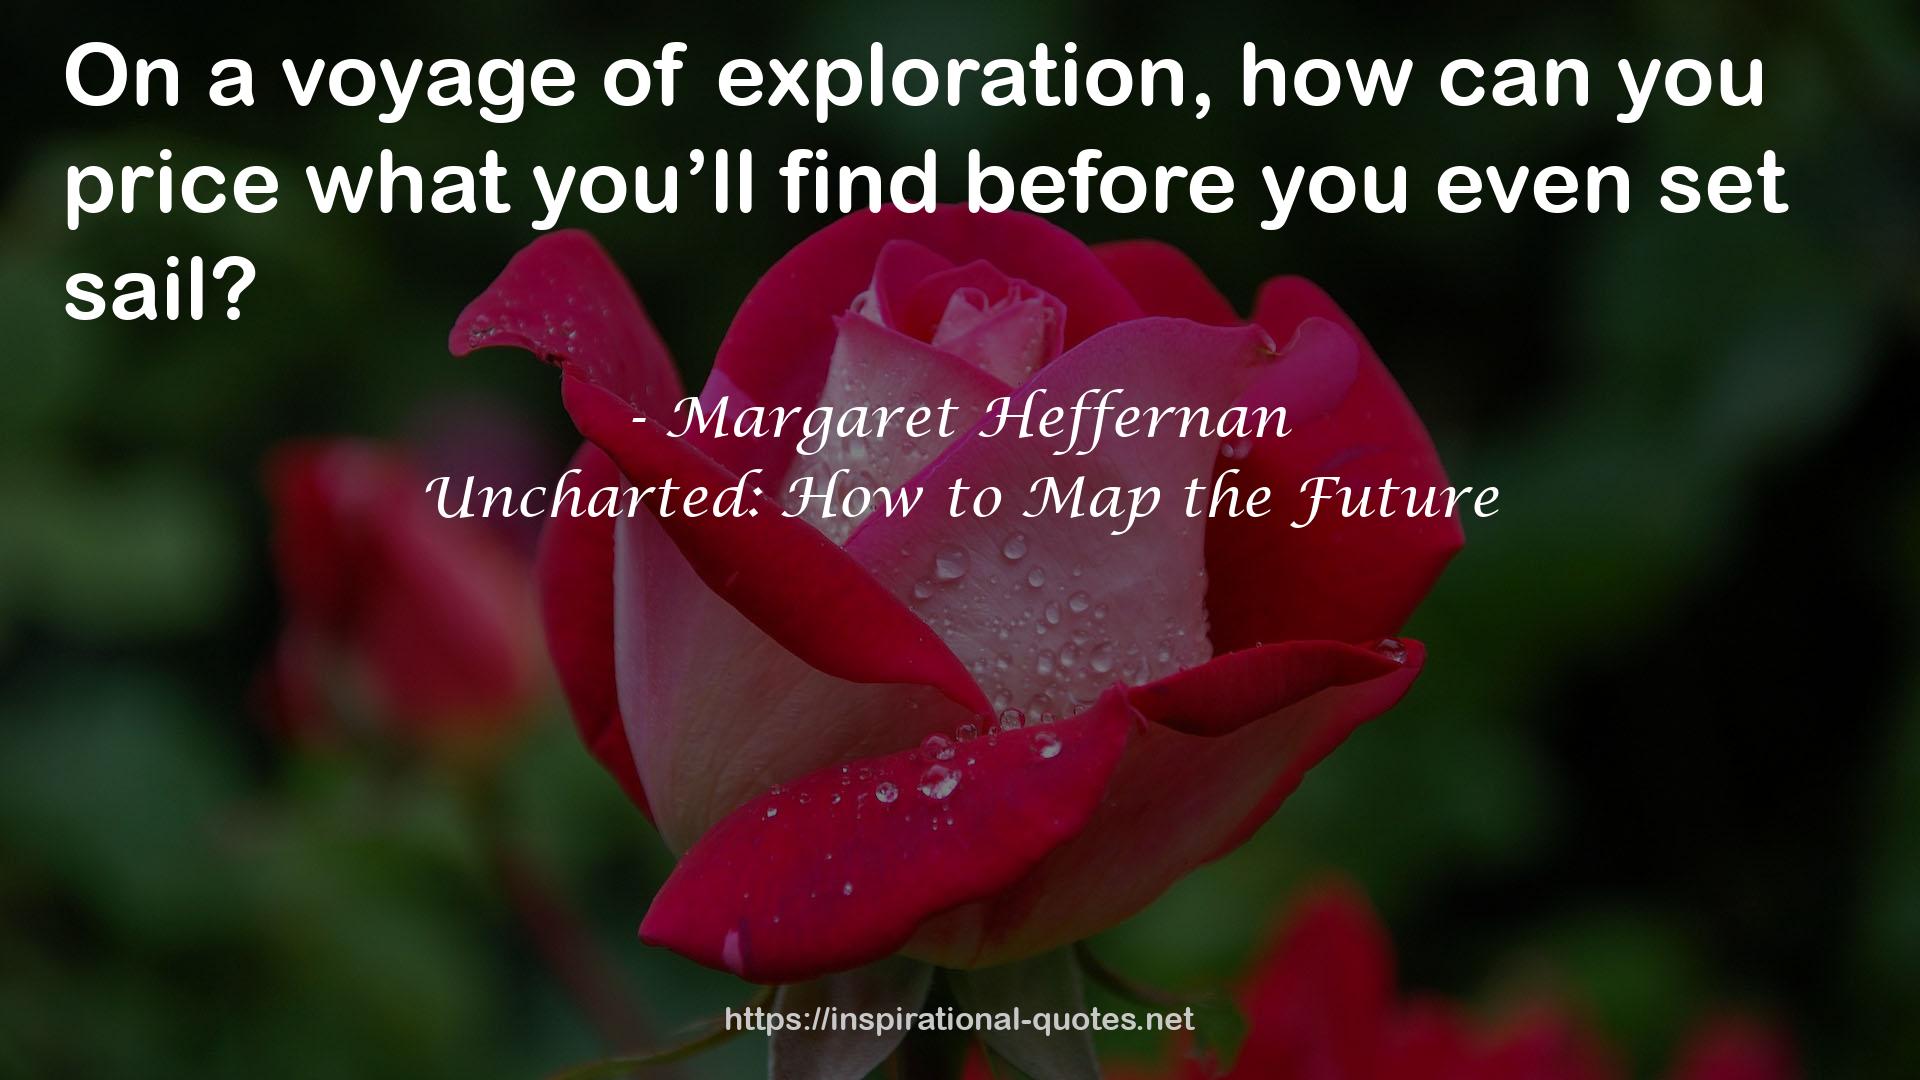 Uncharted: How to Map the Future QUOTES